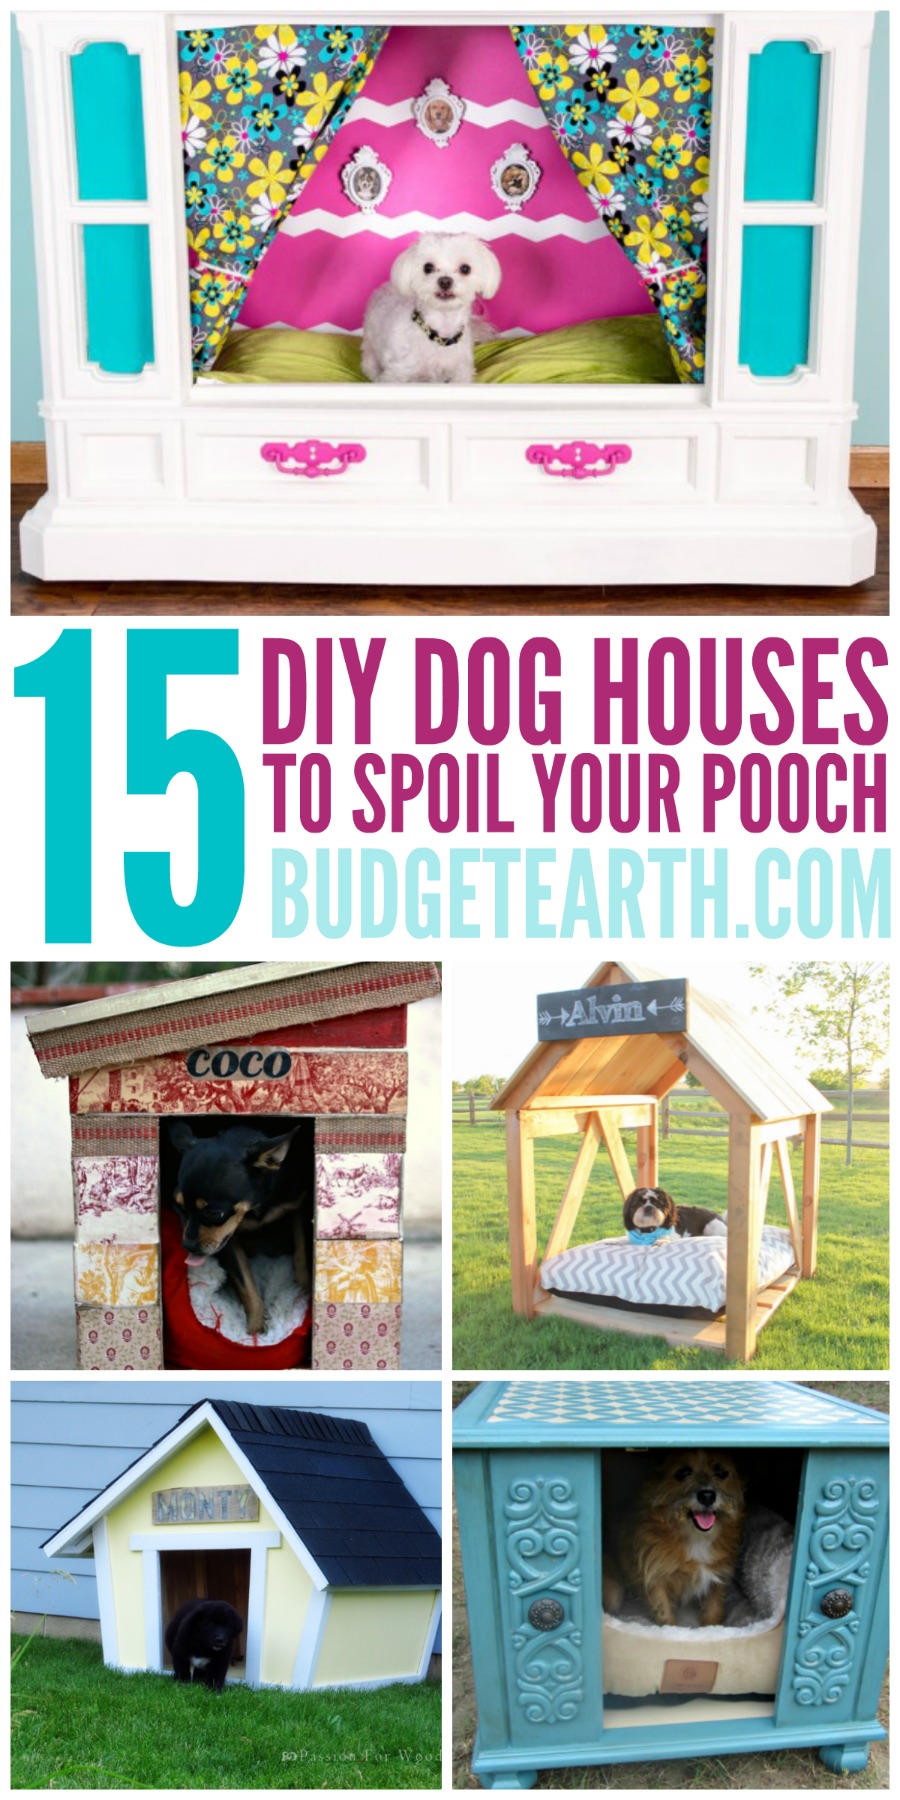 Are you thinking of building a dog house? Check out these 15 DIY Dog Houses perfect for any pooch here!